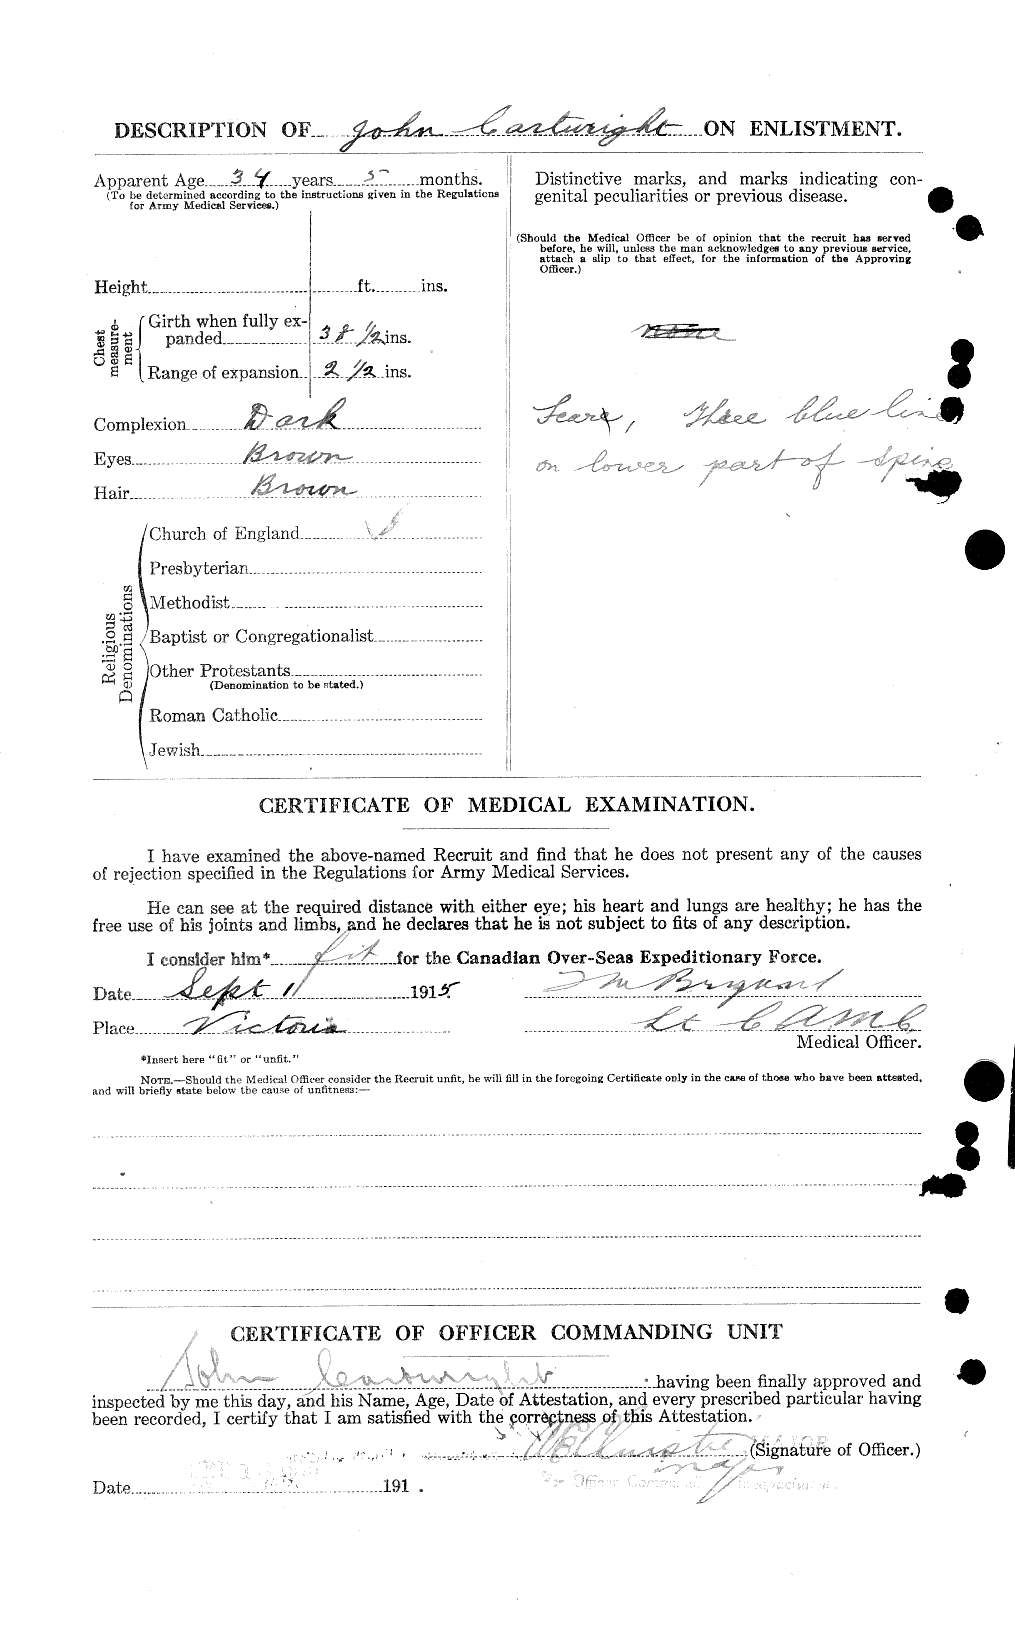 Personnel Records of the First World War - CEF 011599b